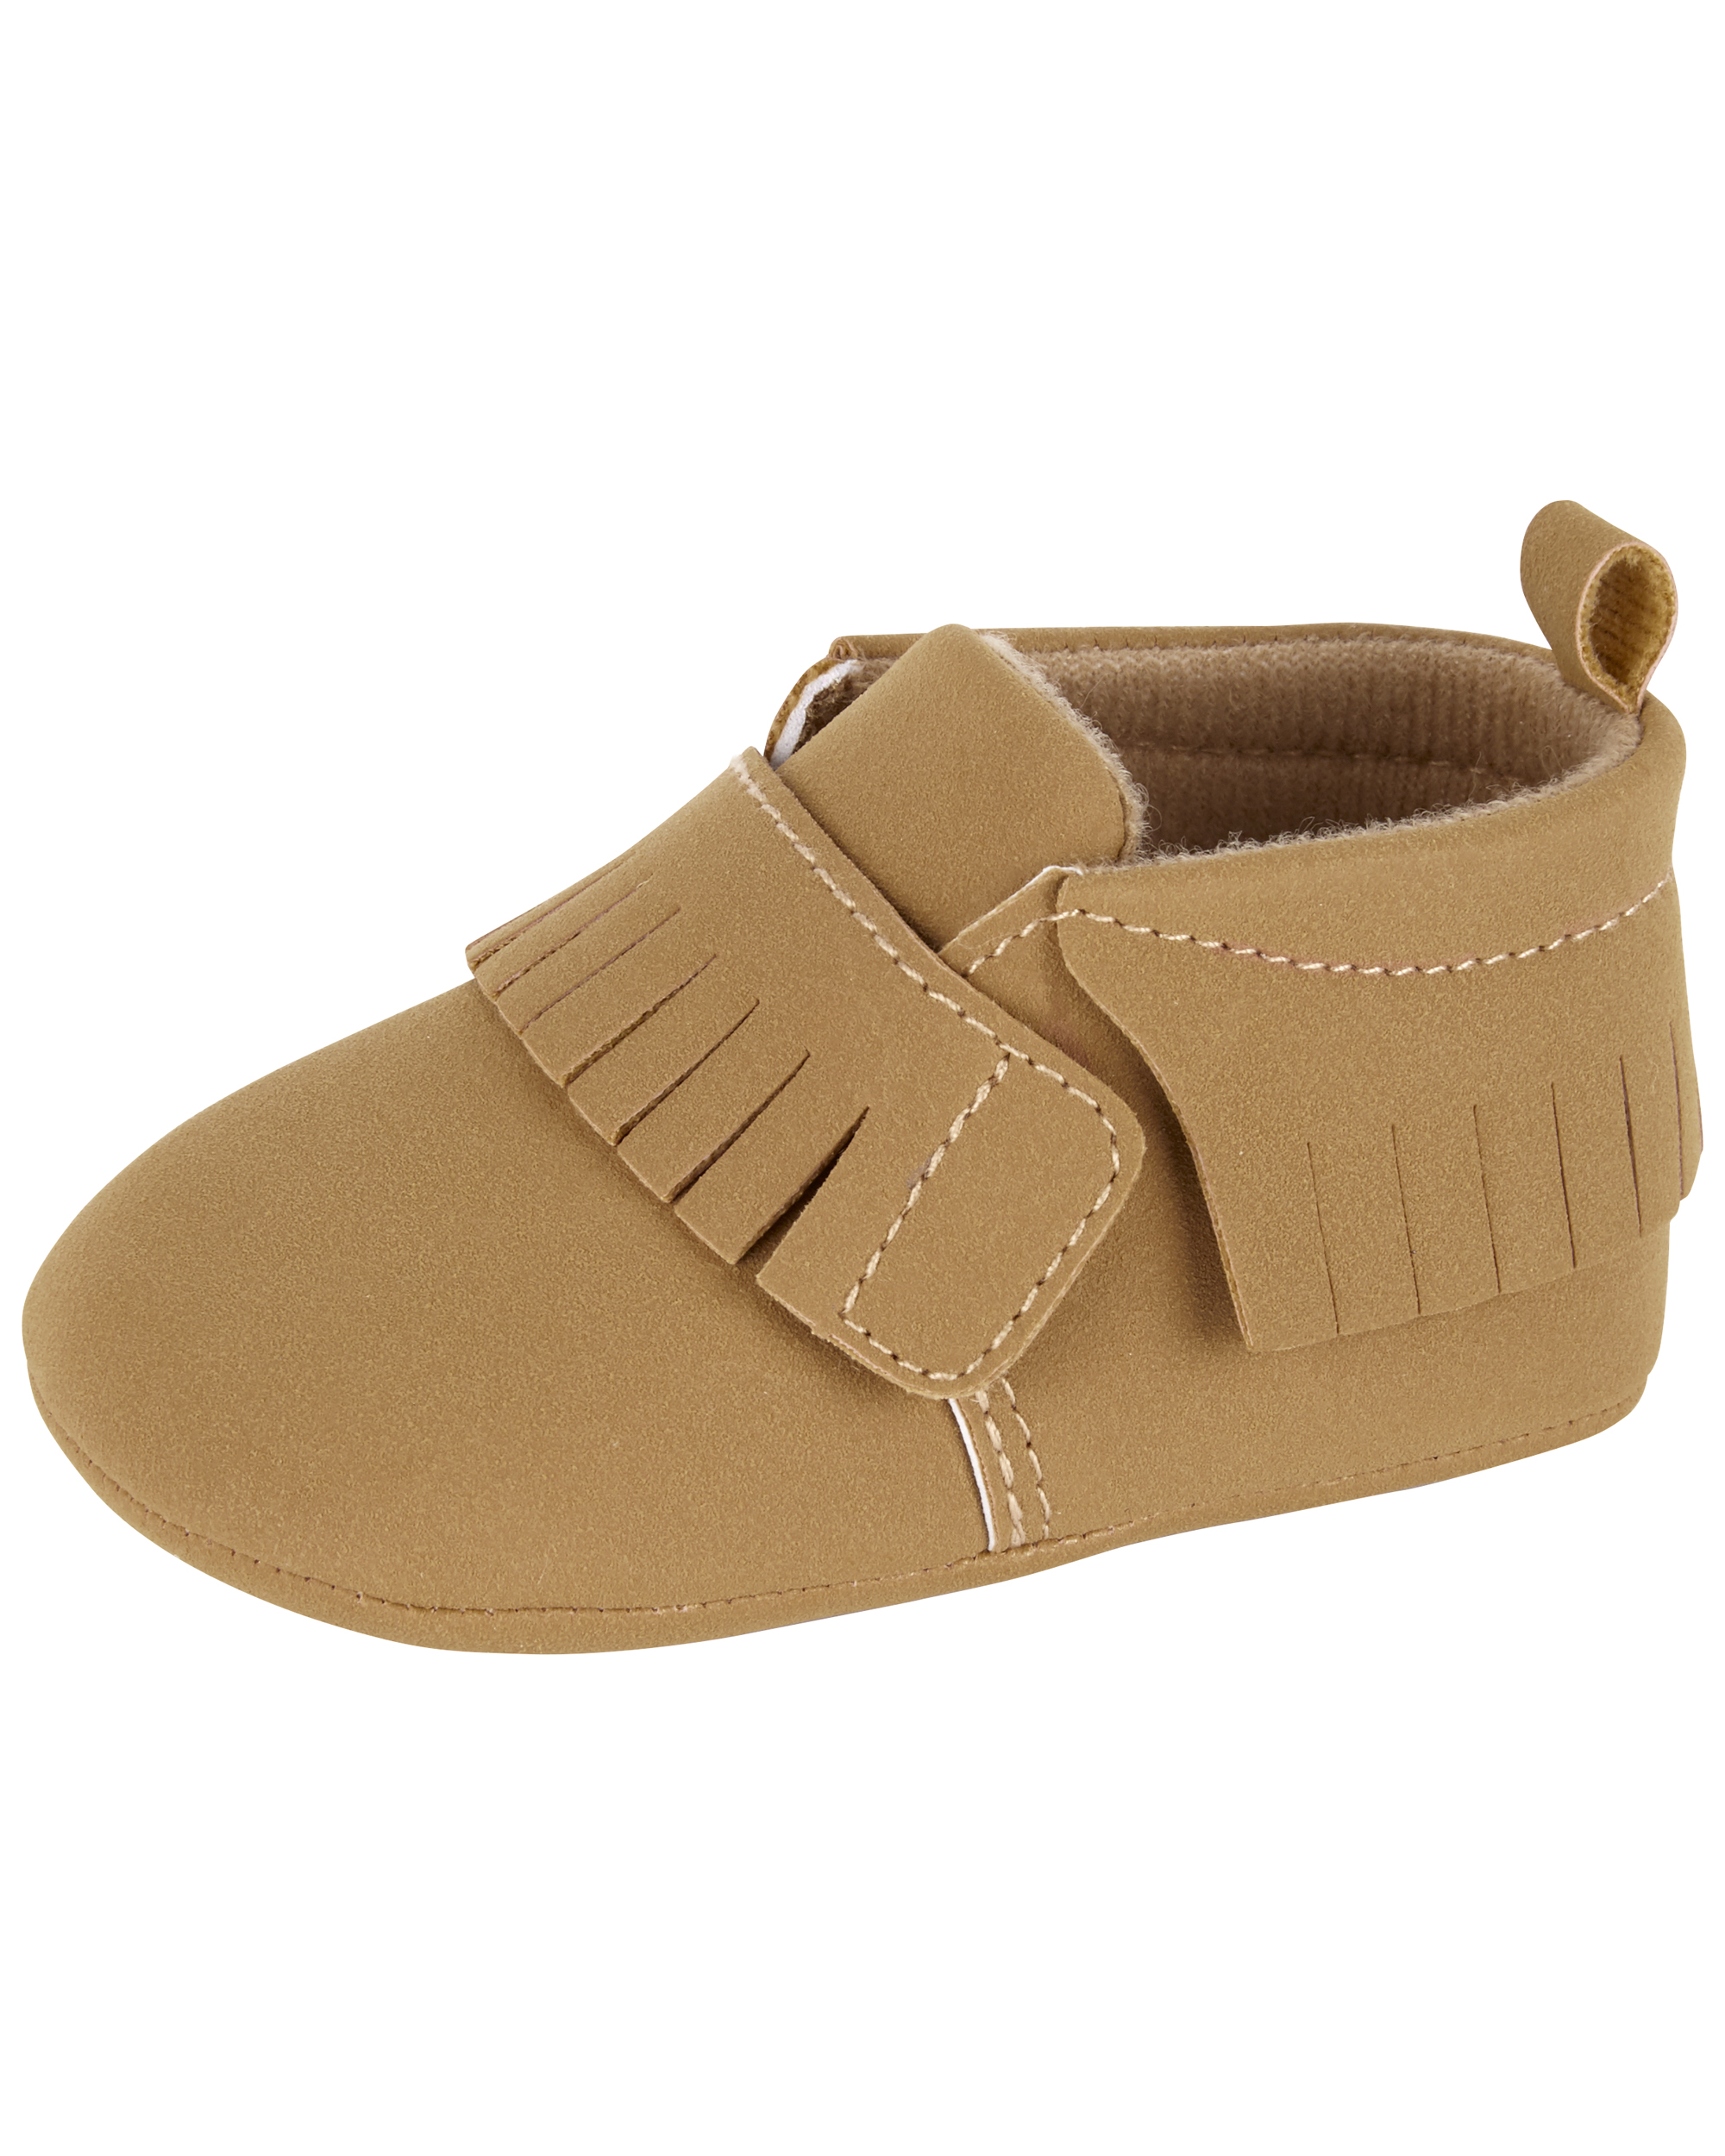 Fringe Bootie Baby Shoes